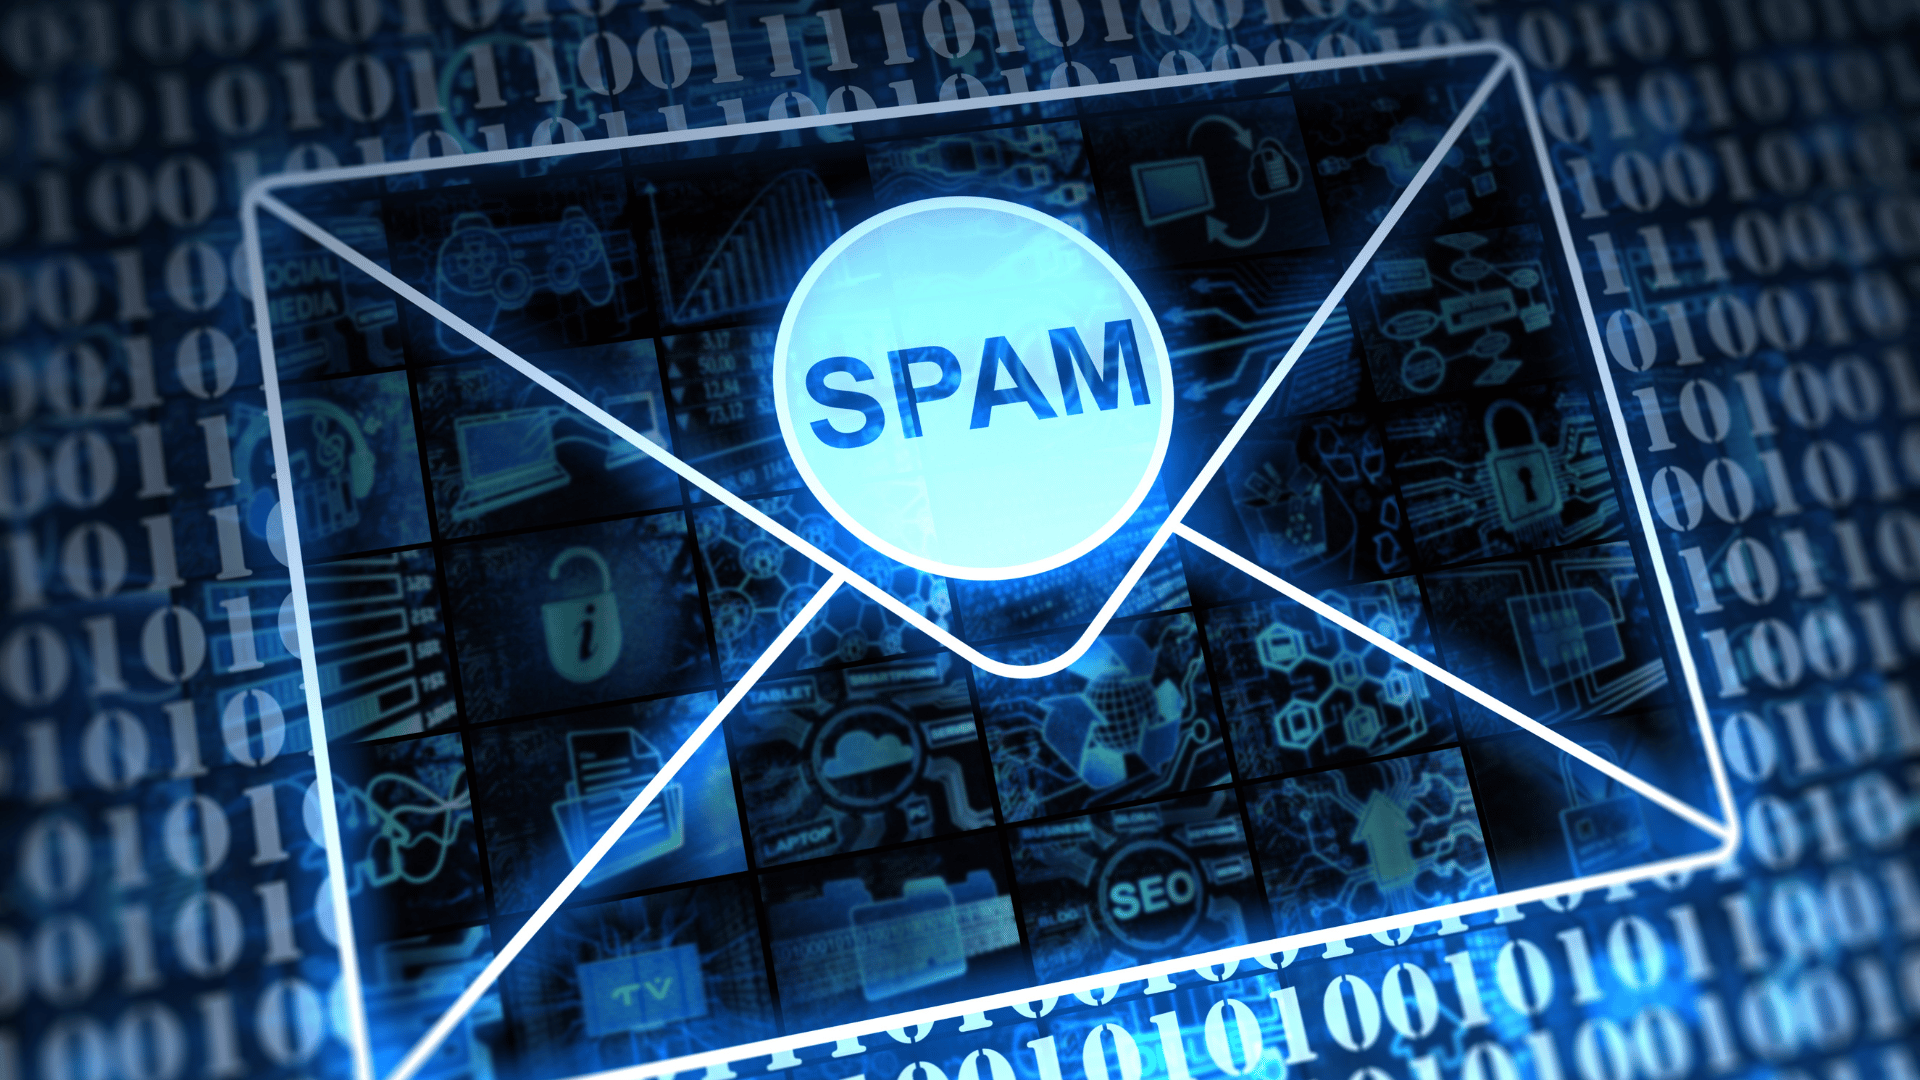 Automattic’s Akismet: How Effective is their Spam Filtering Solution? A Review